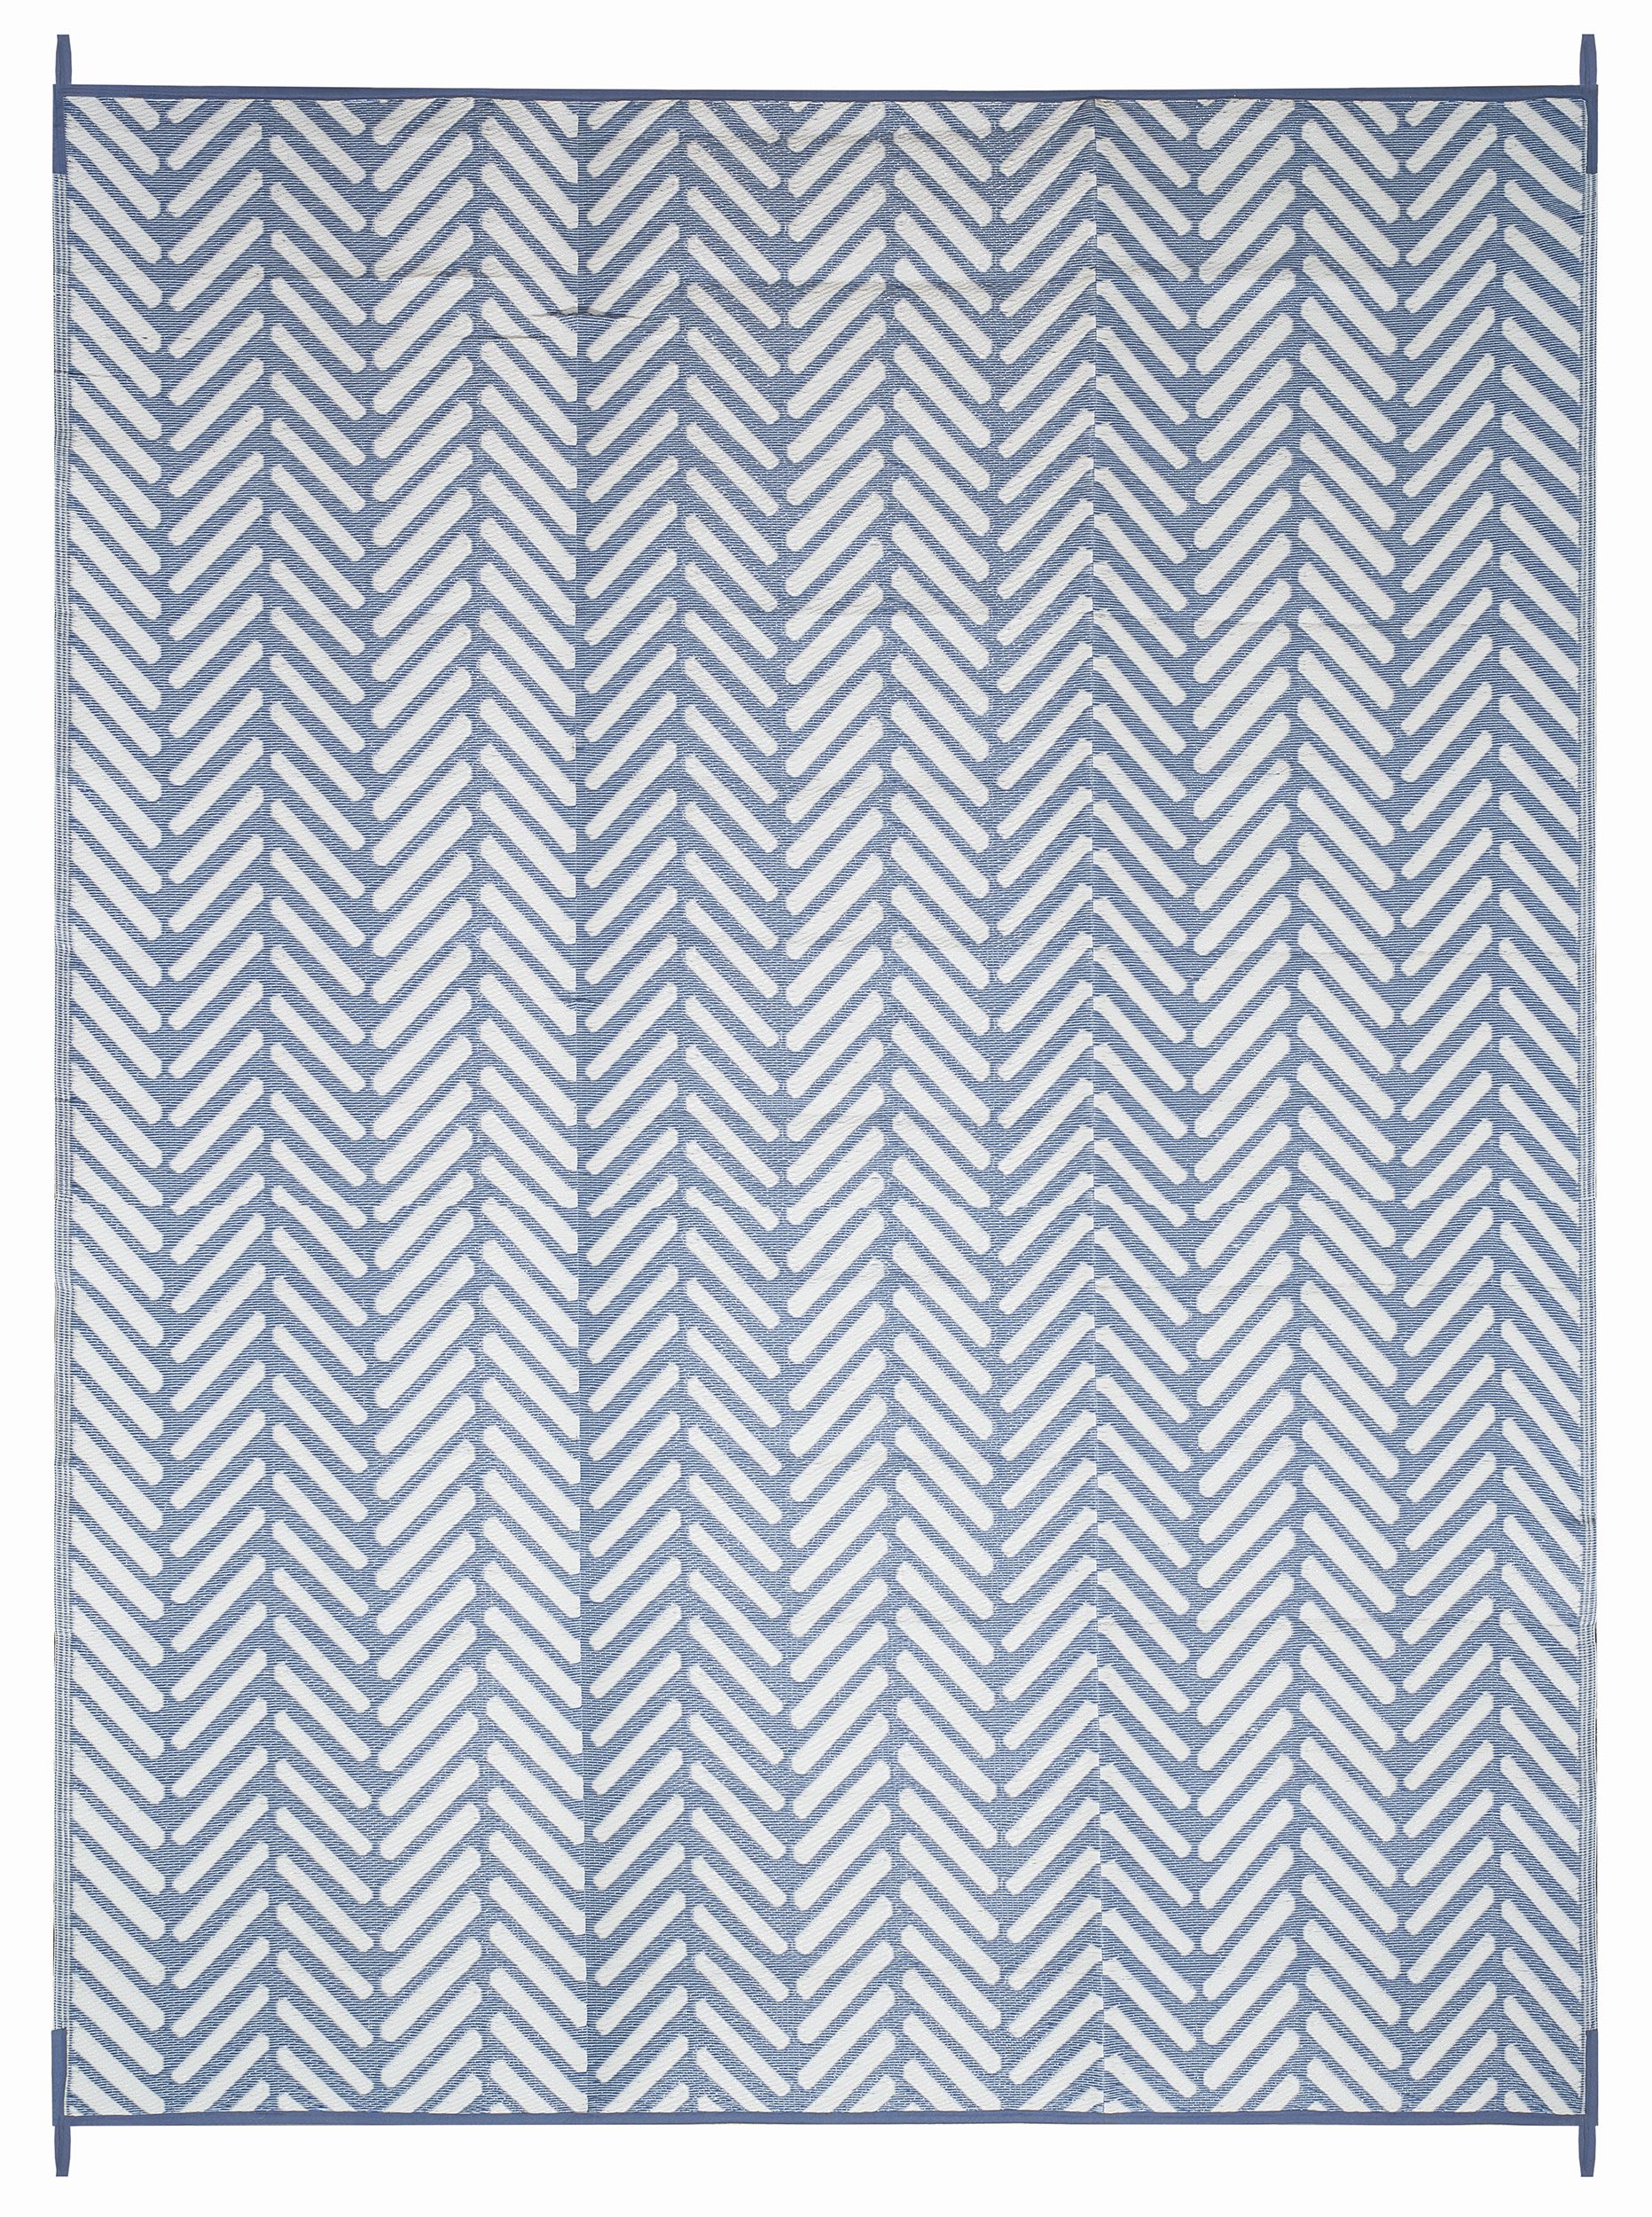 FH Home Outdoor Rug - Waterproof, Fade Resistant, Reversible - Premium Recycled Plastic - Herringbone - Large Patio, Deck, Sunroom, RV, Camping - Fresno - Light Blue - 9 x 12 ft Foldable - image 1 of 7